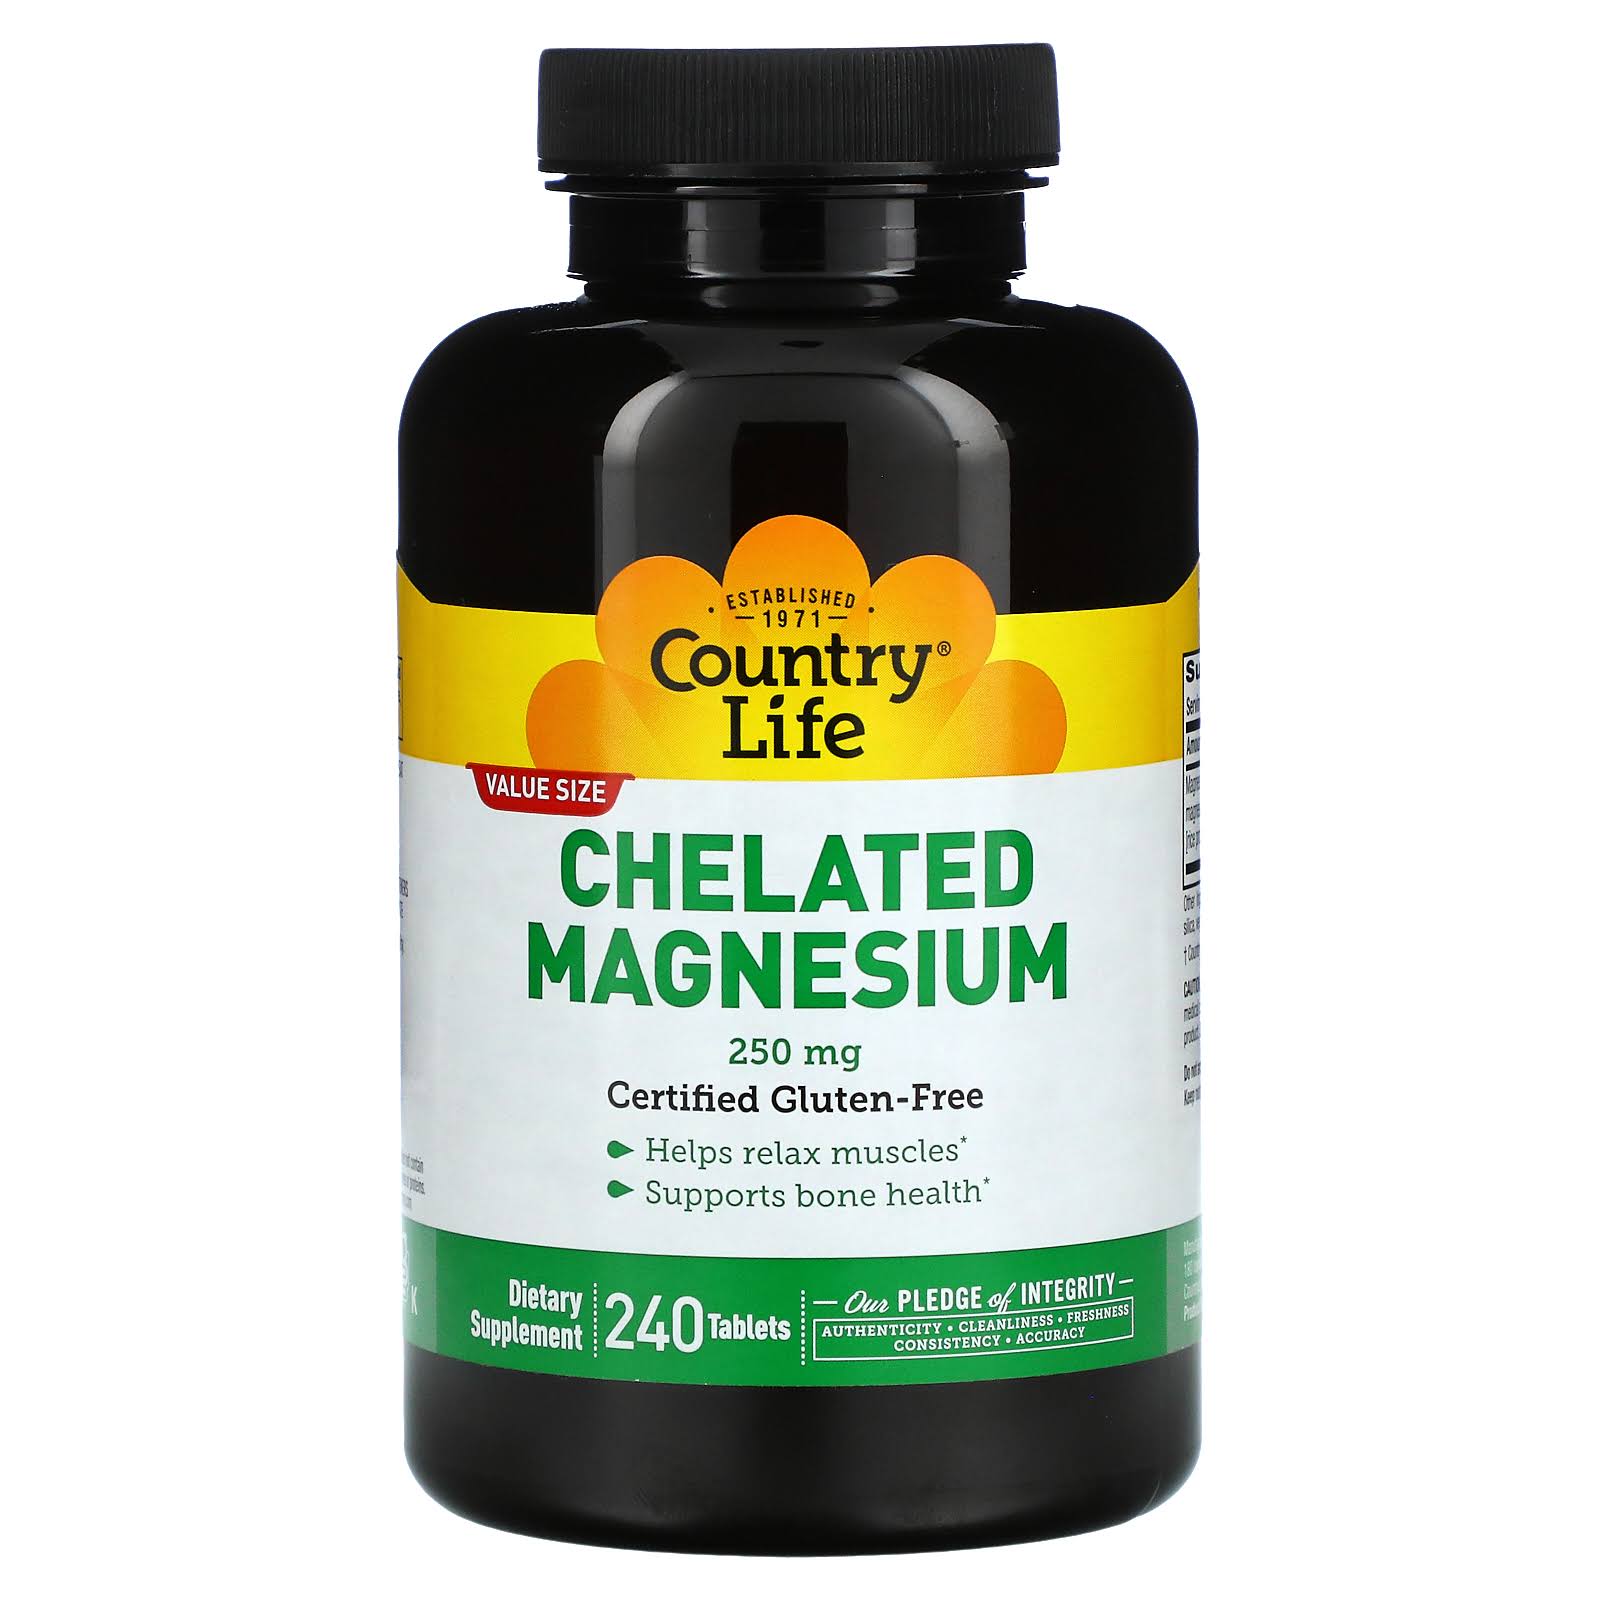 Country Life - Chelated Magnesium 250 mg - 240 Tablets